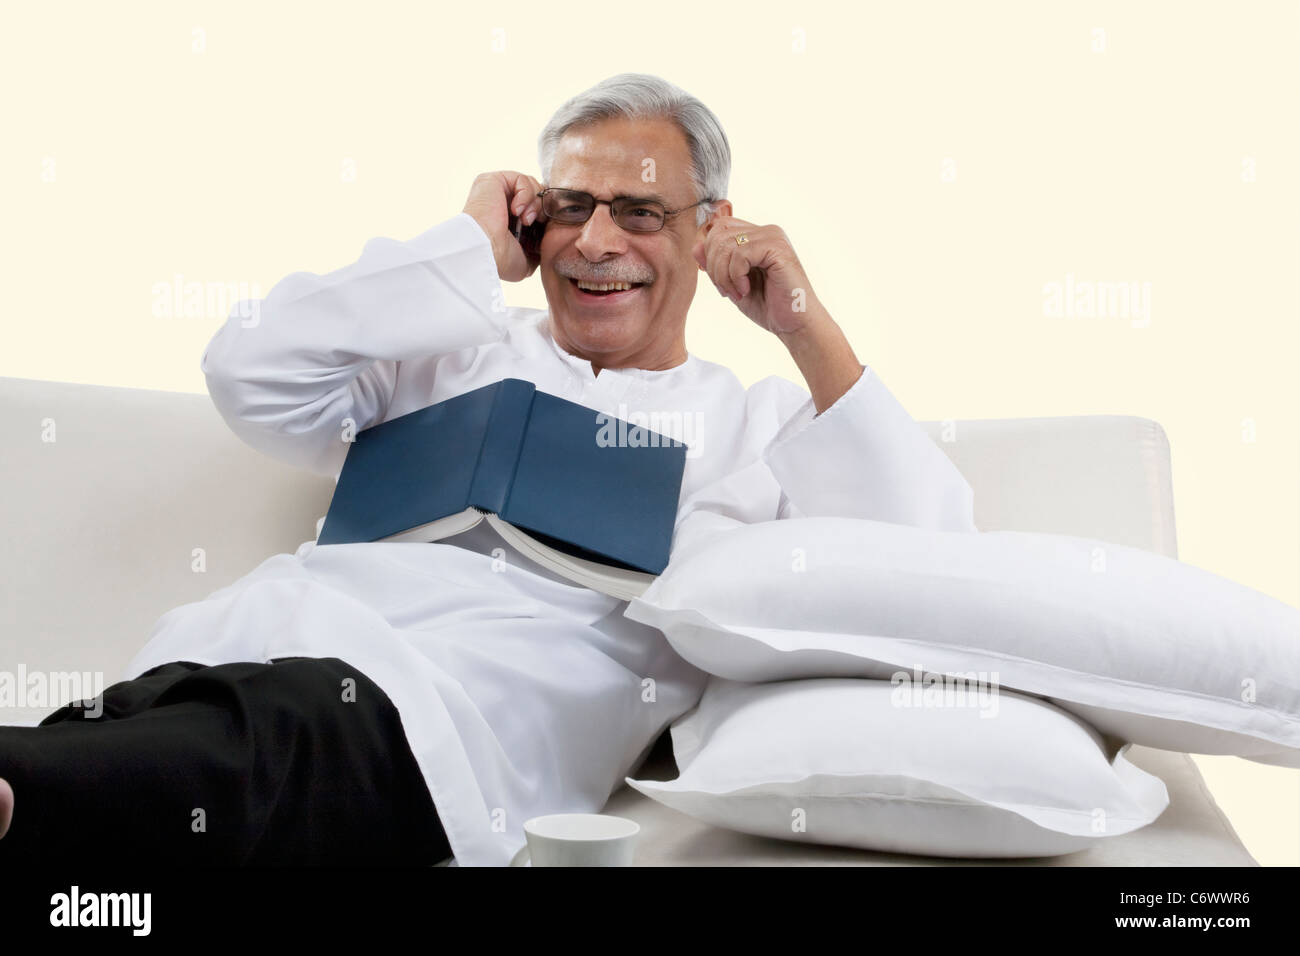 Old man talking on a mobile phone Stock Photo